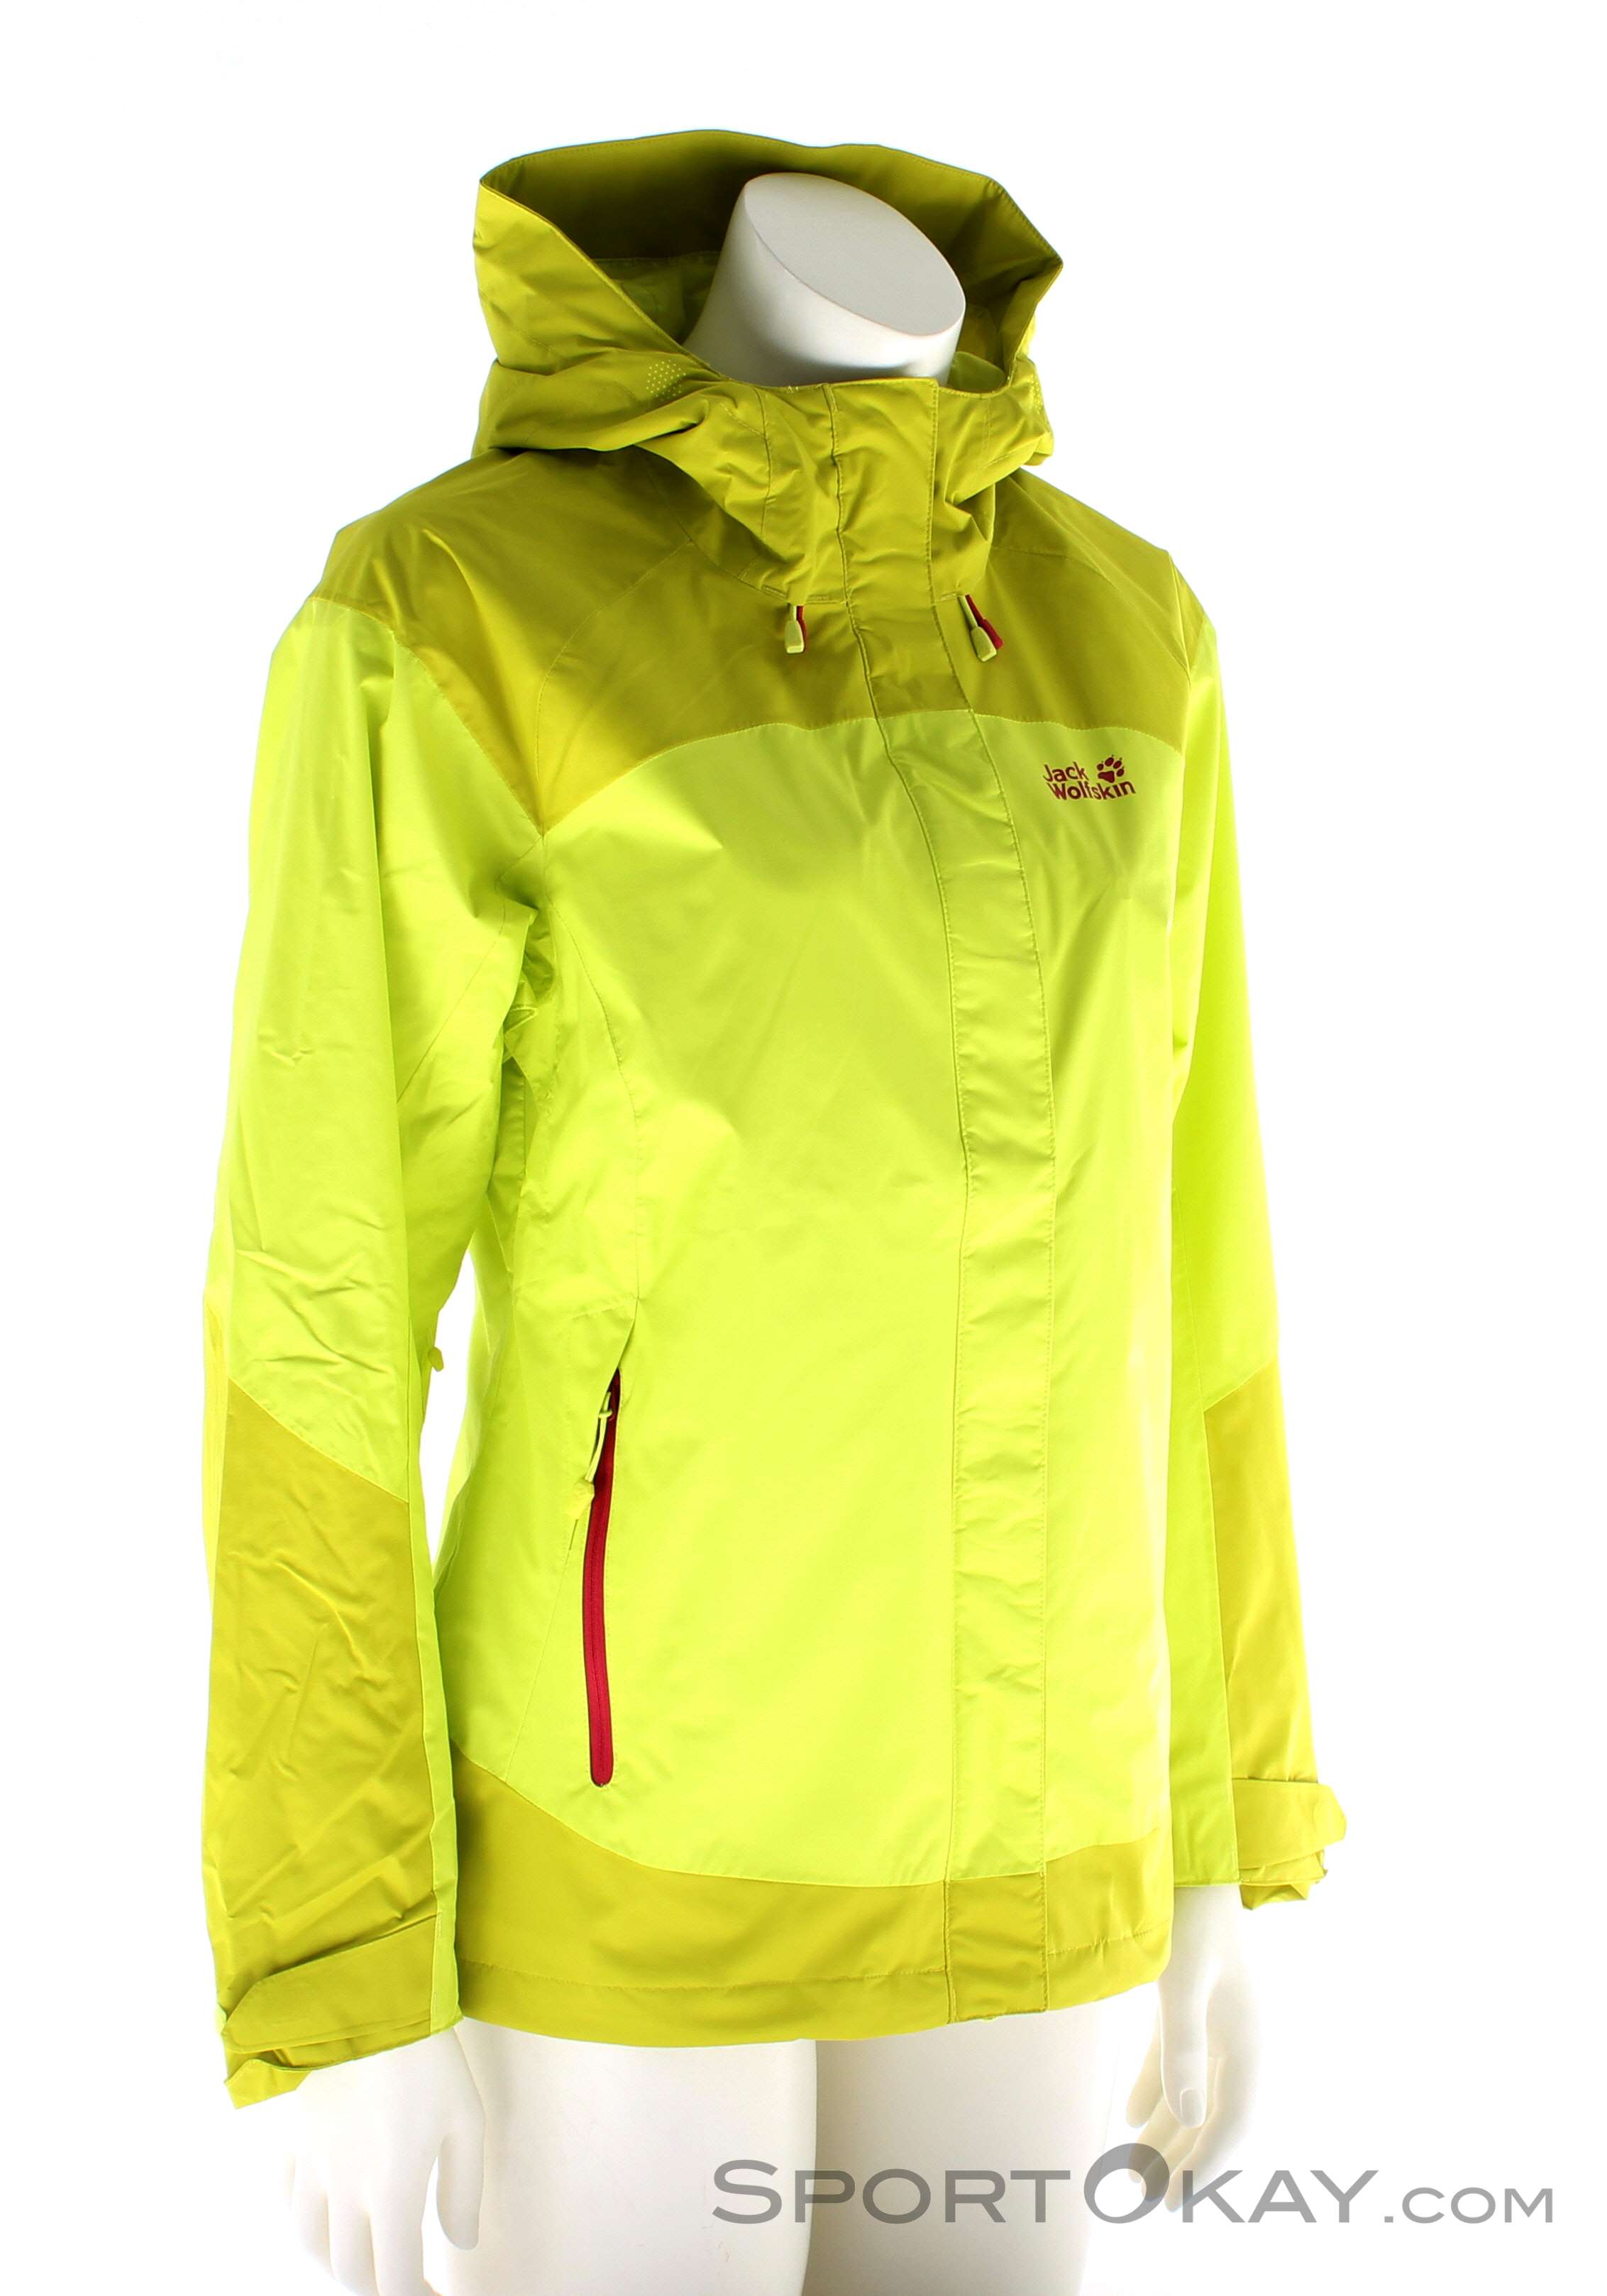 Wolfskin Rocket Jacket Womens Outdoor - Jackets - Outdoor Clothing - Outdoor - All